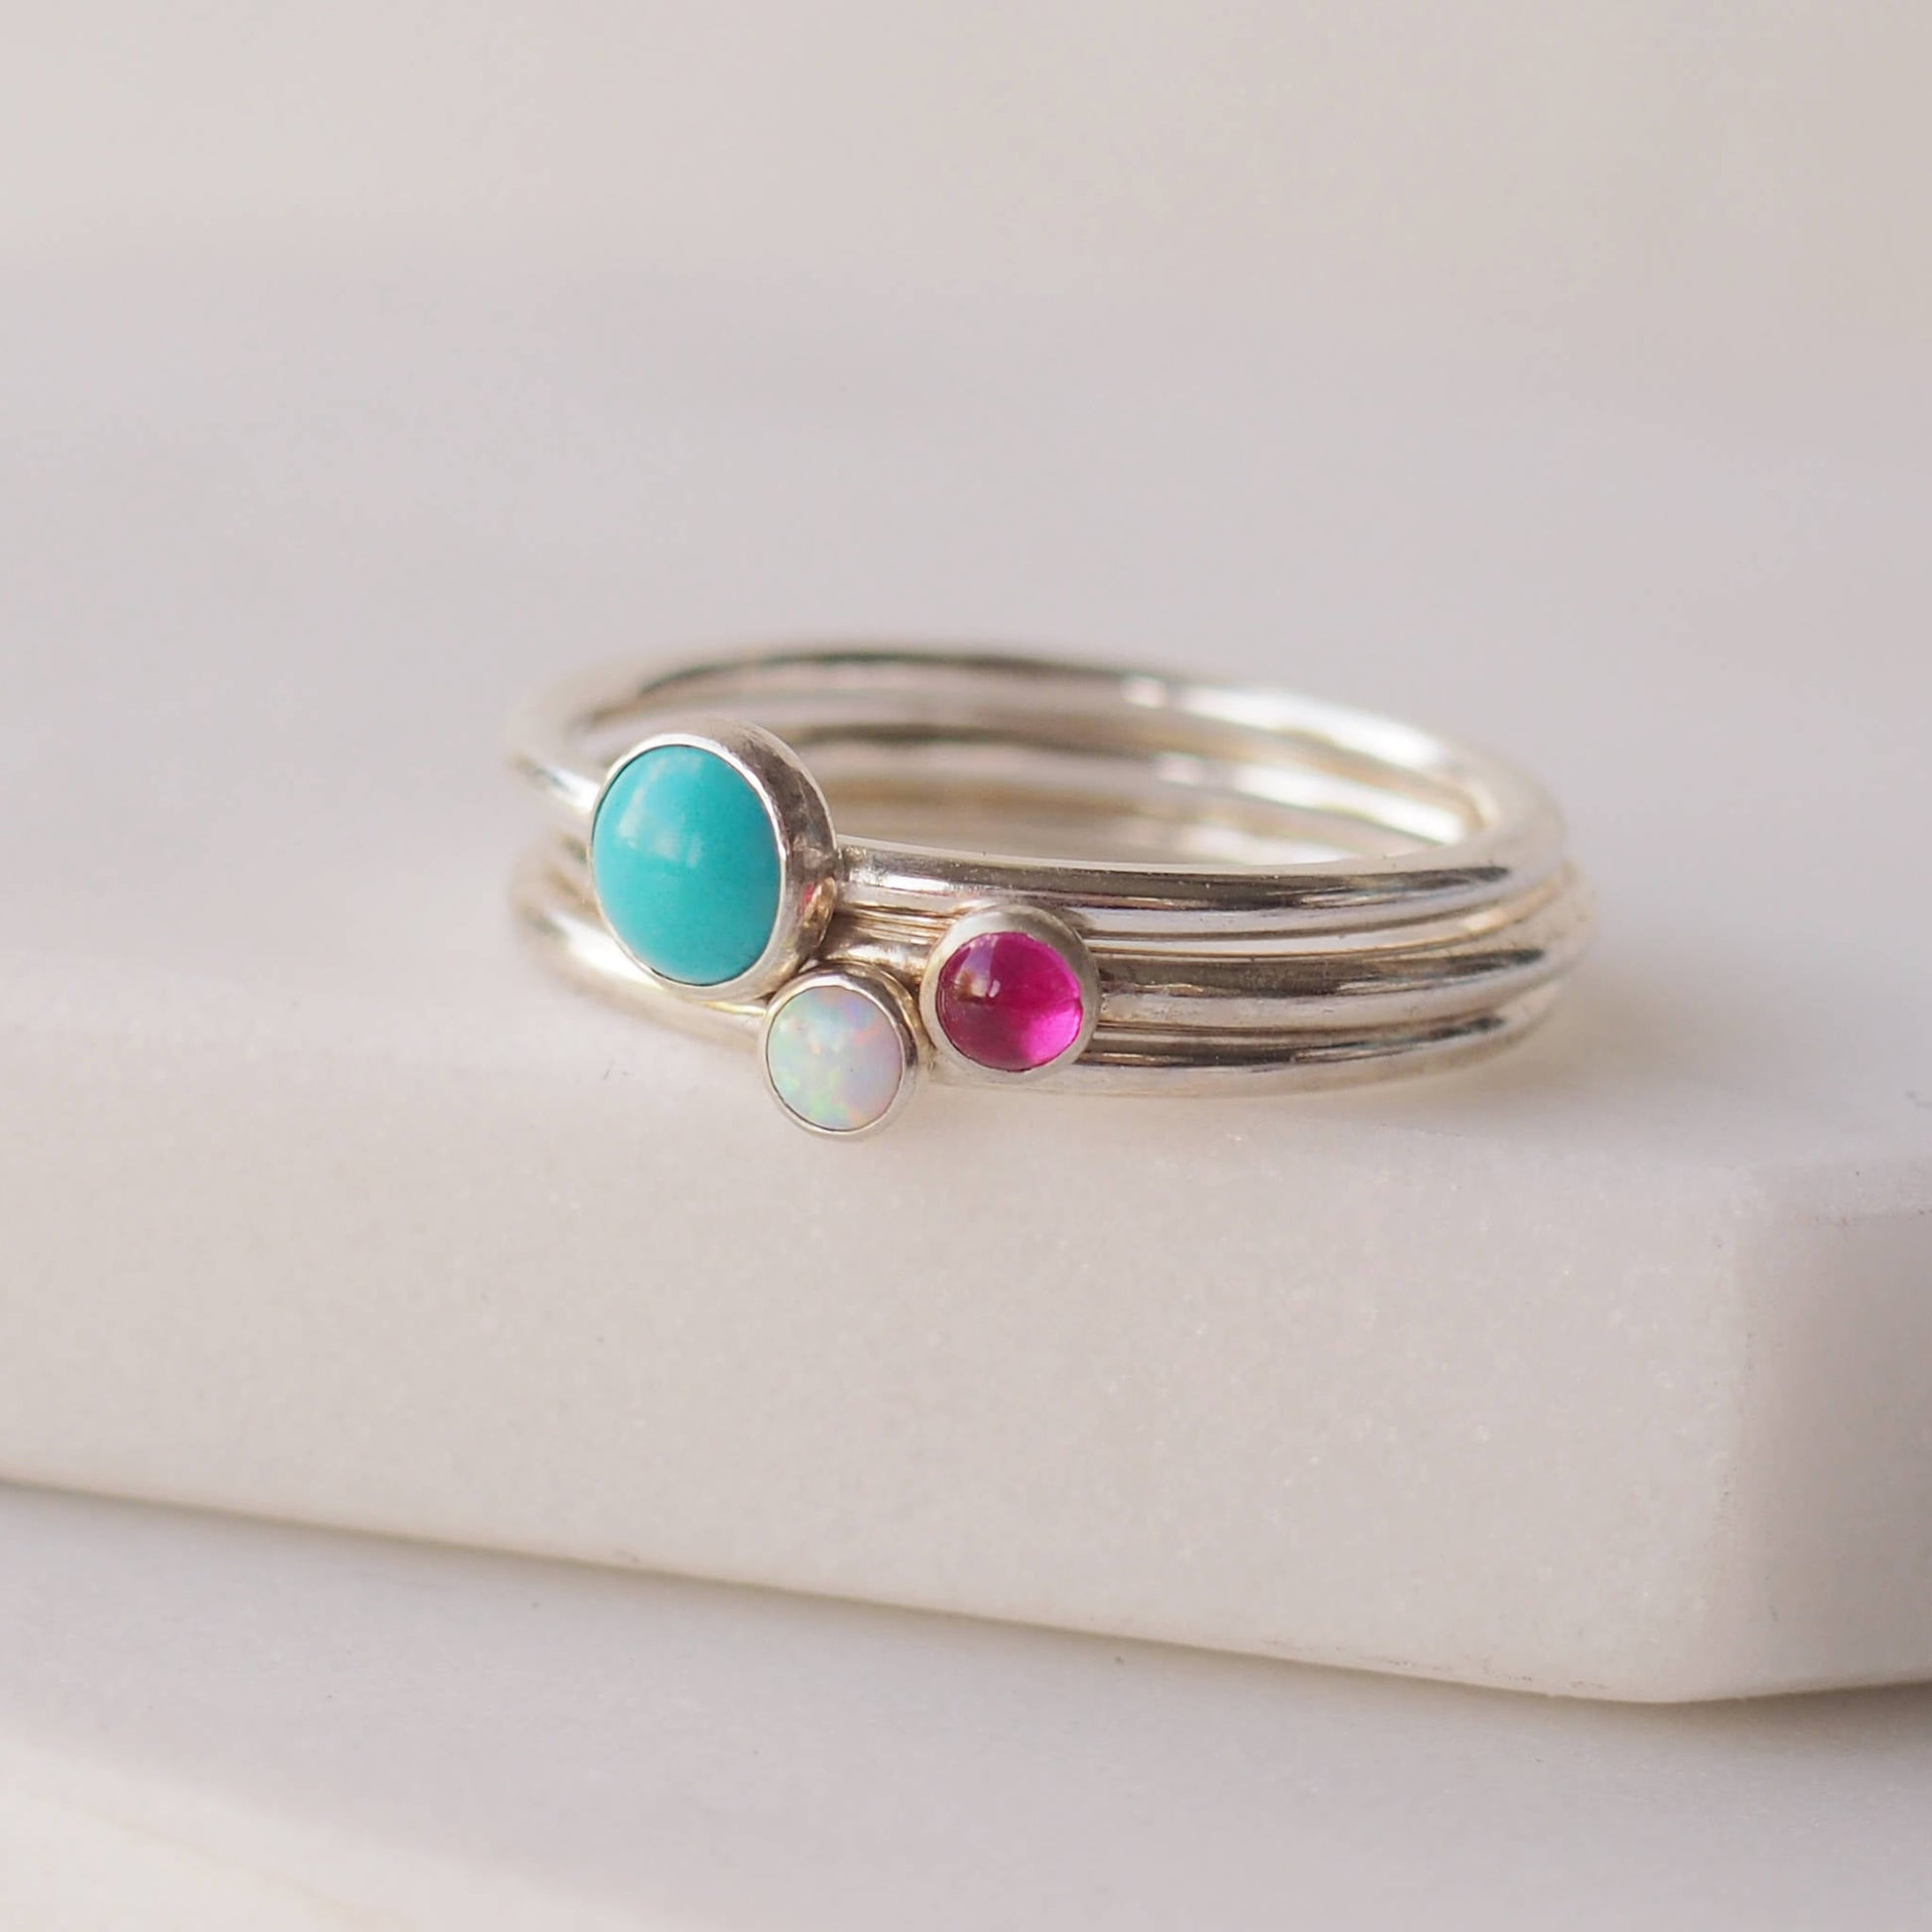 Three ring birthstone set with a large Turquoise, smaller  Lab Opal and Lab Ruby. Handmade by maram jewellery in Scotland UK 